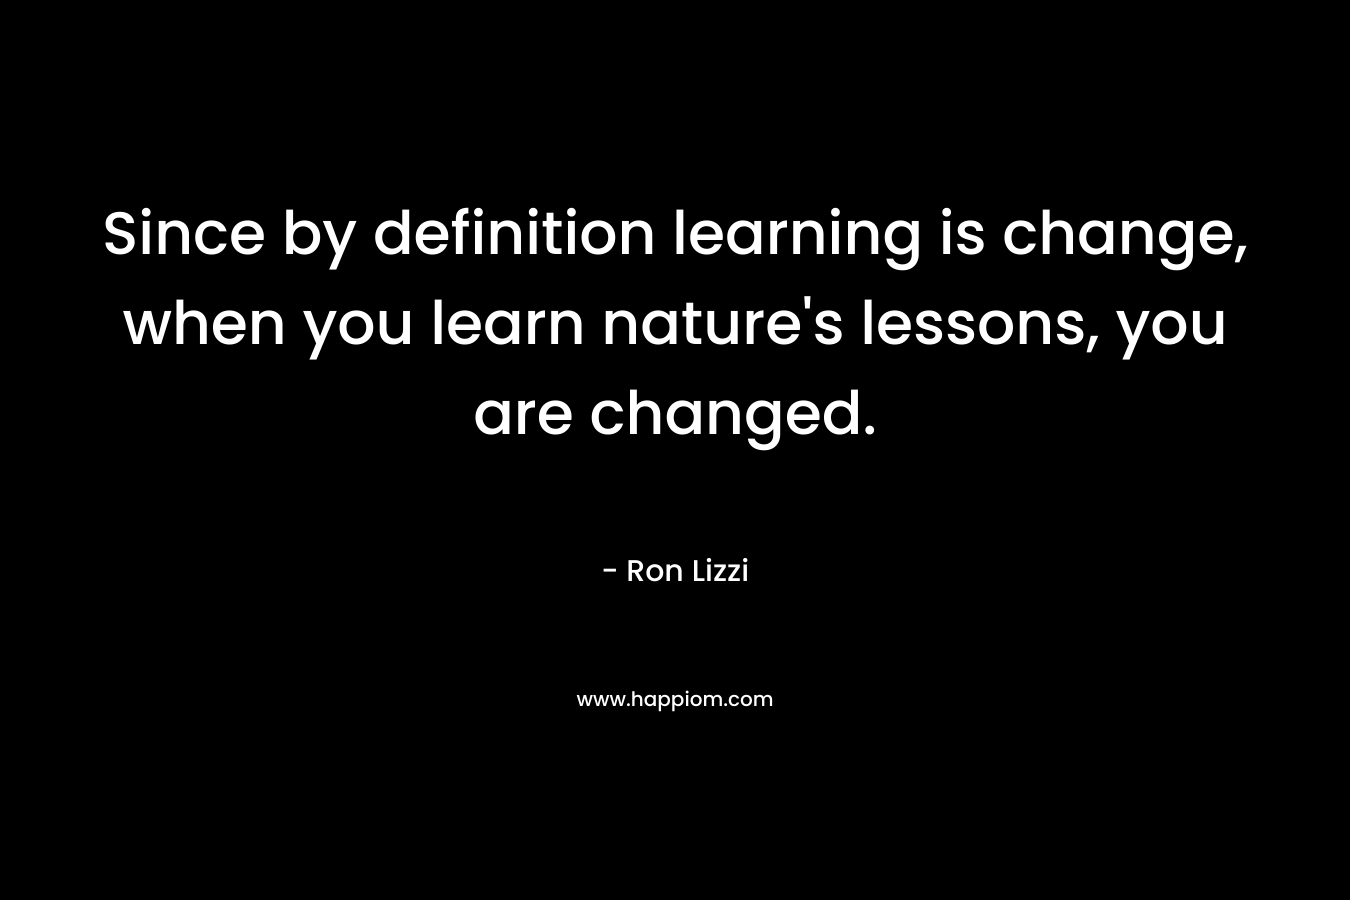 Since by definition learning is change, when you learn nature's lessons, you are changed.